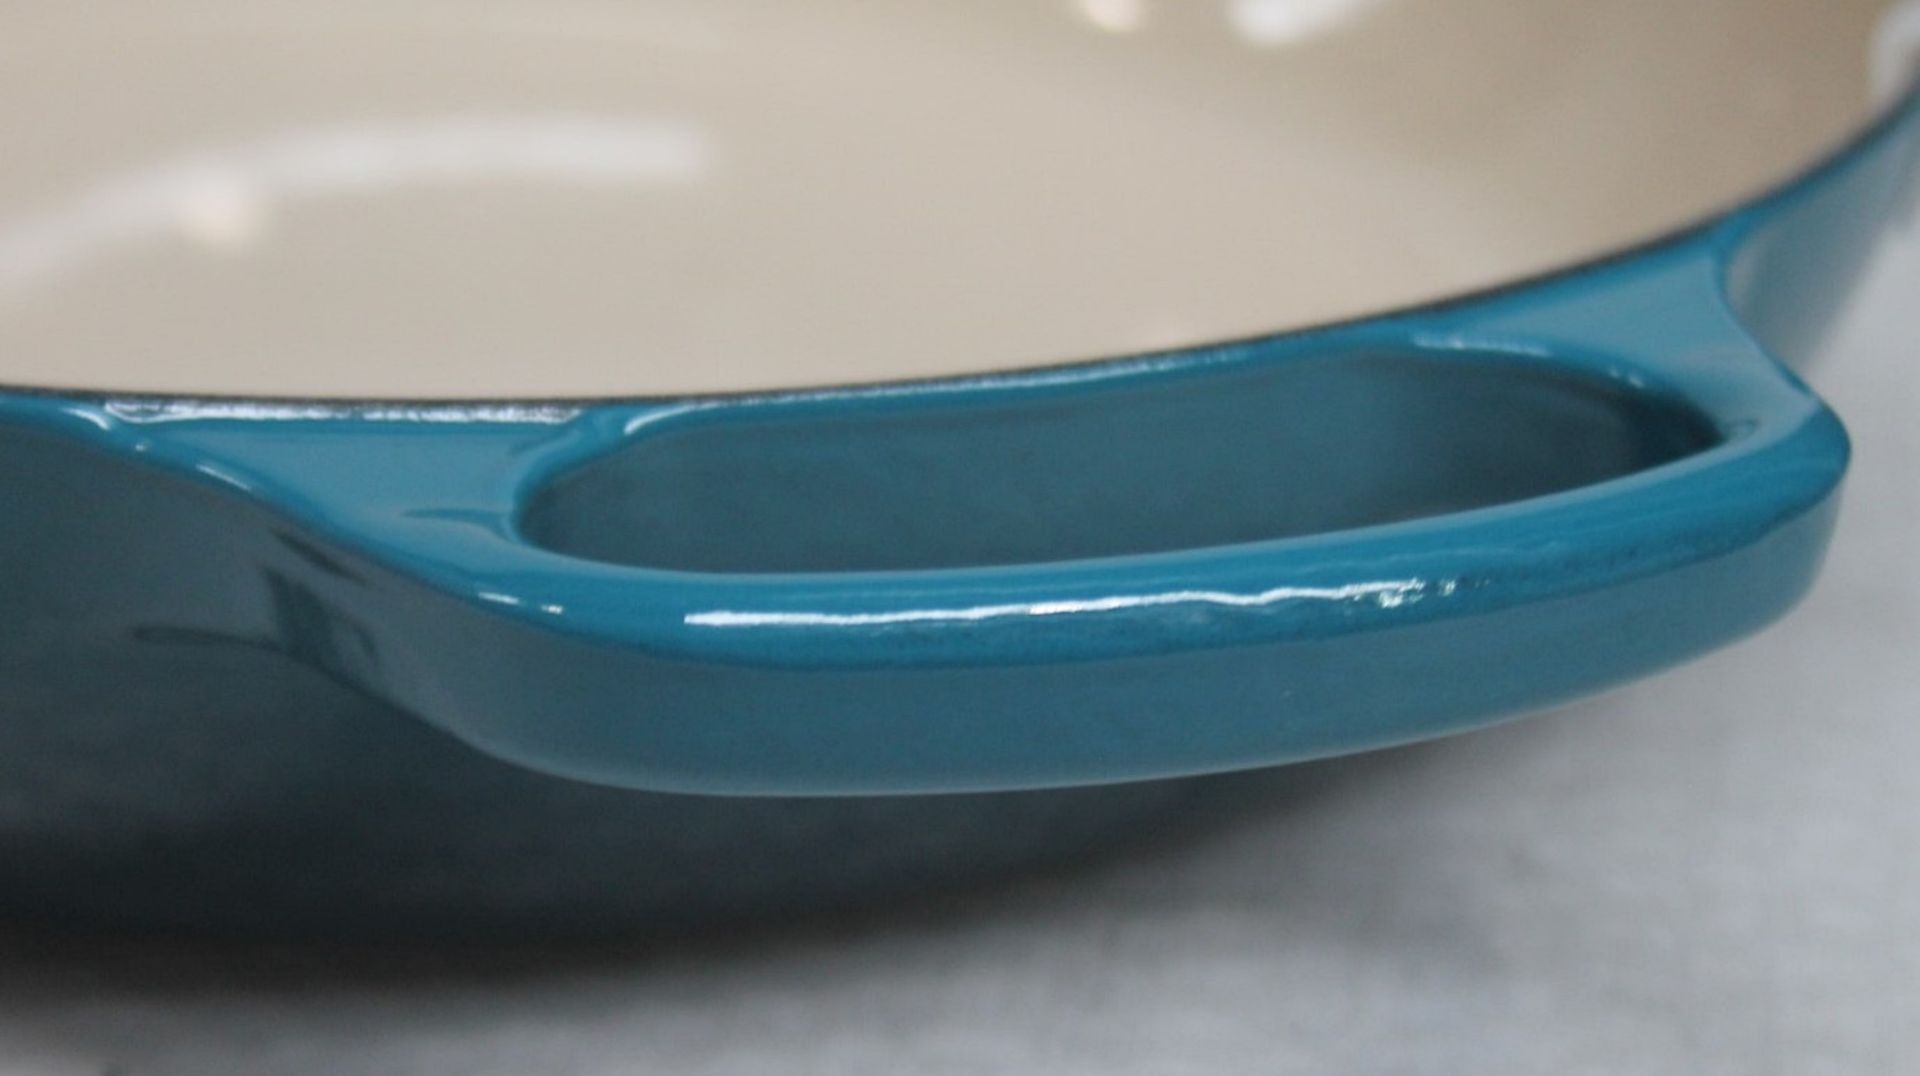 1 x LE CREUSET 'Signature' Enamelled Cast Iron Shallow Casserole Dish In Teal - RRP £270.00 - Image 4 of 13